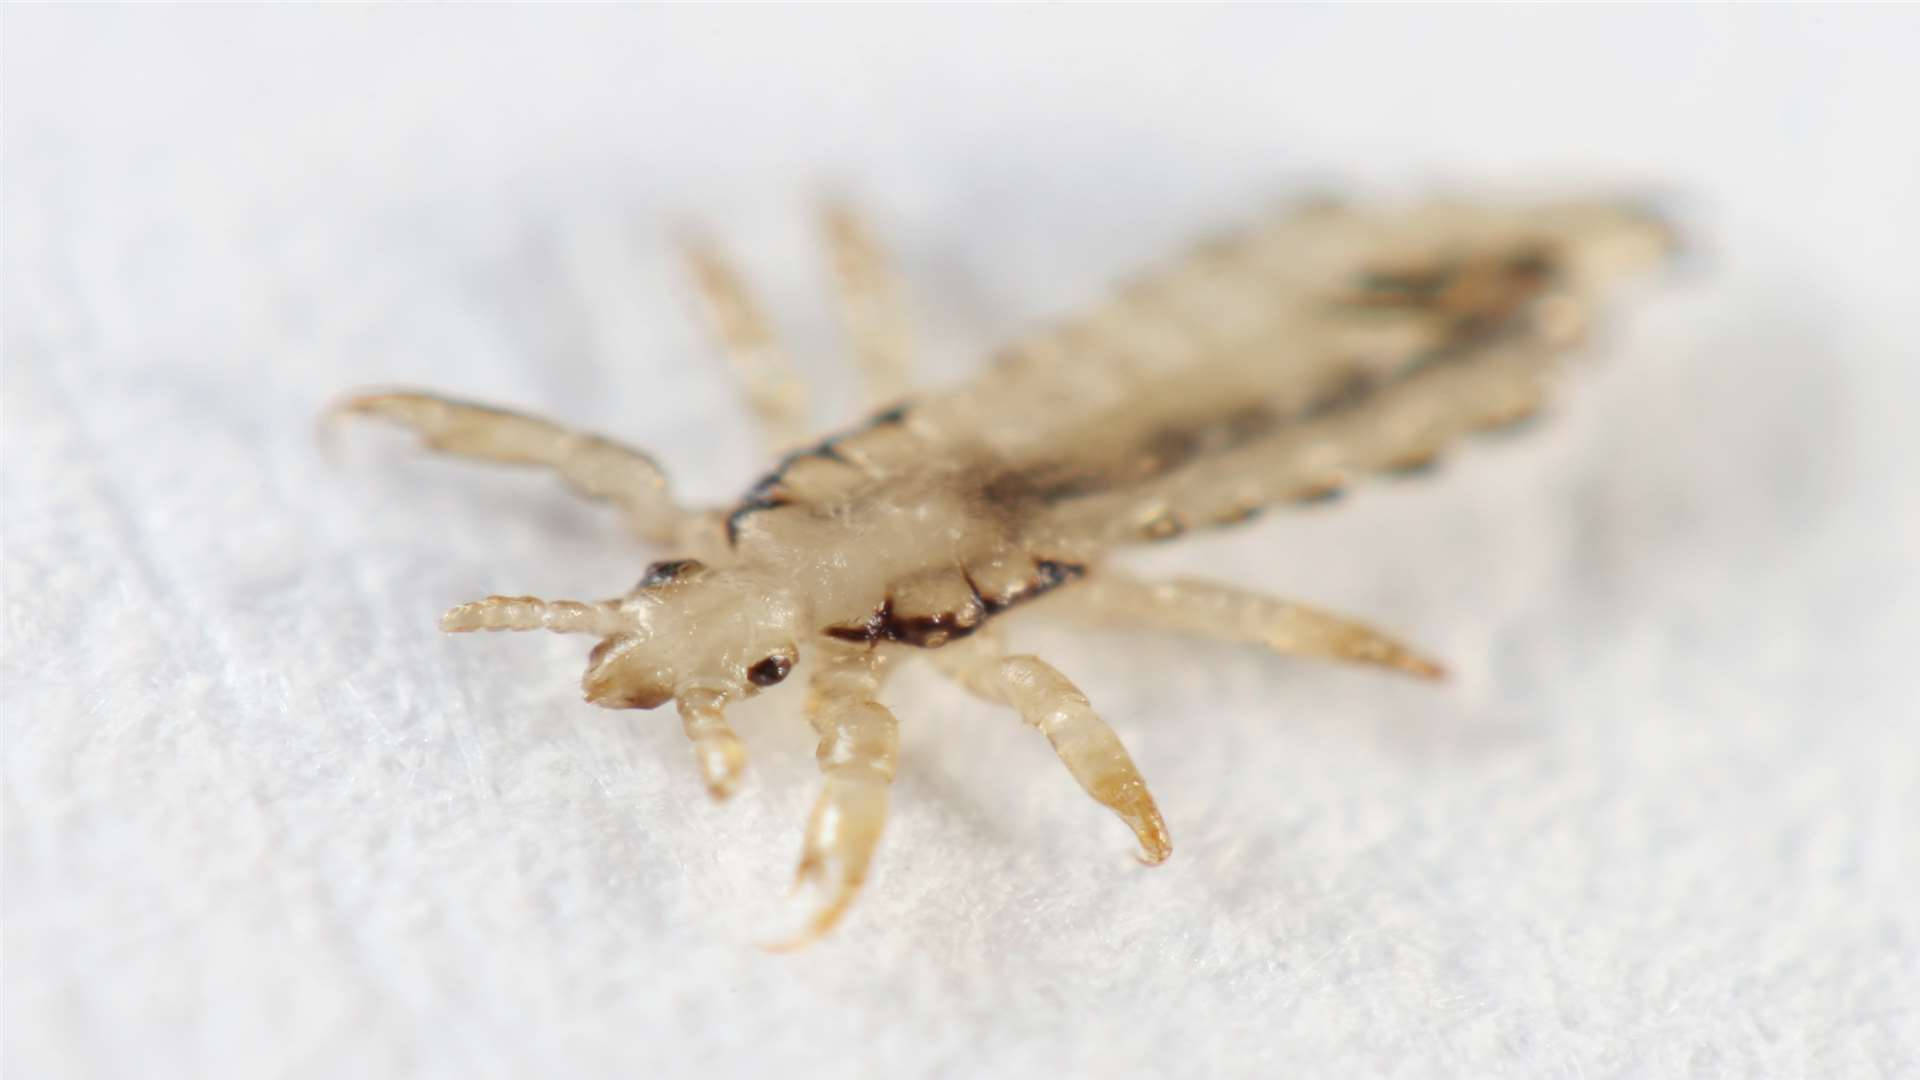 Close-Up View of a Translucent Head Louse Wallpaper